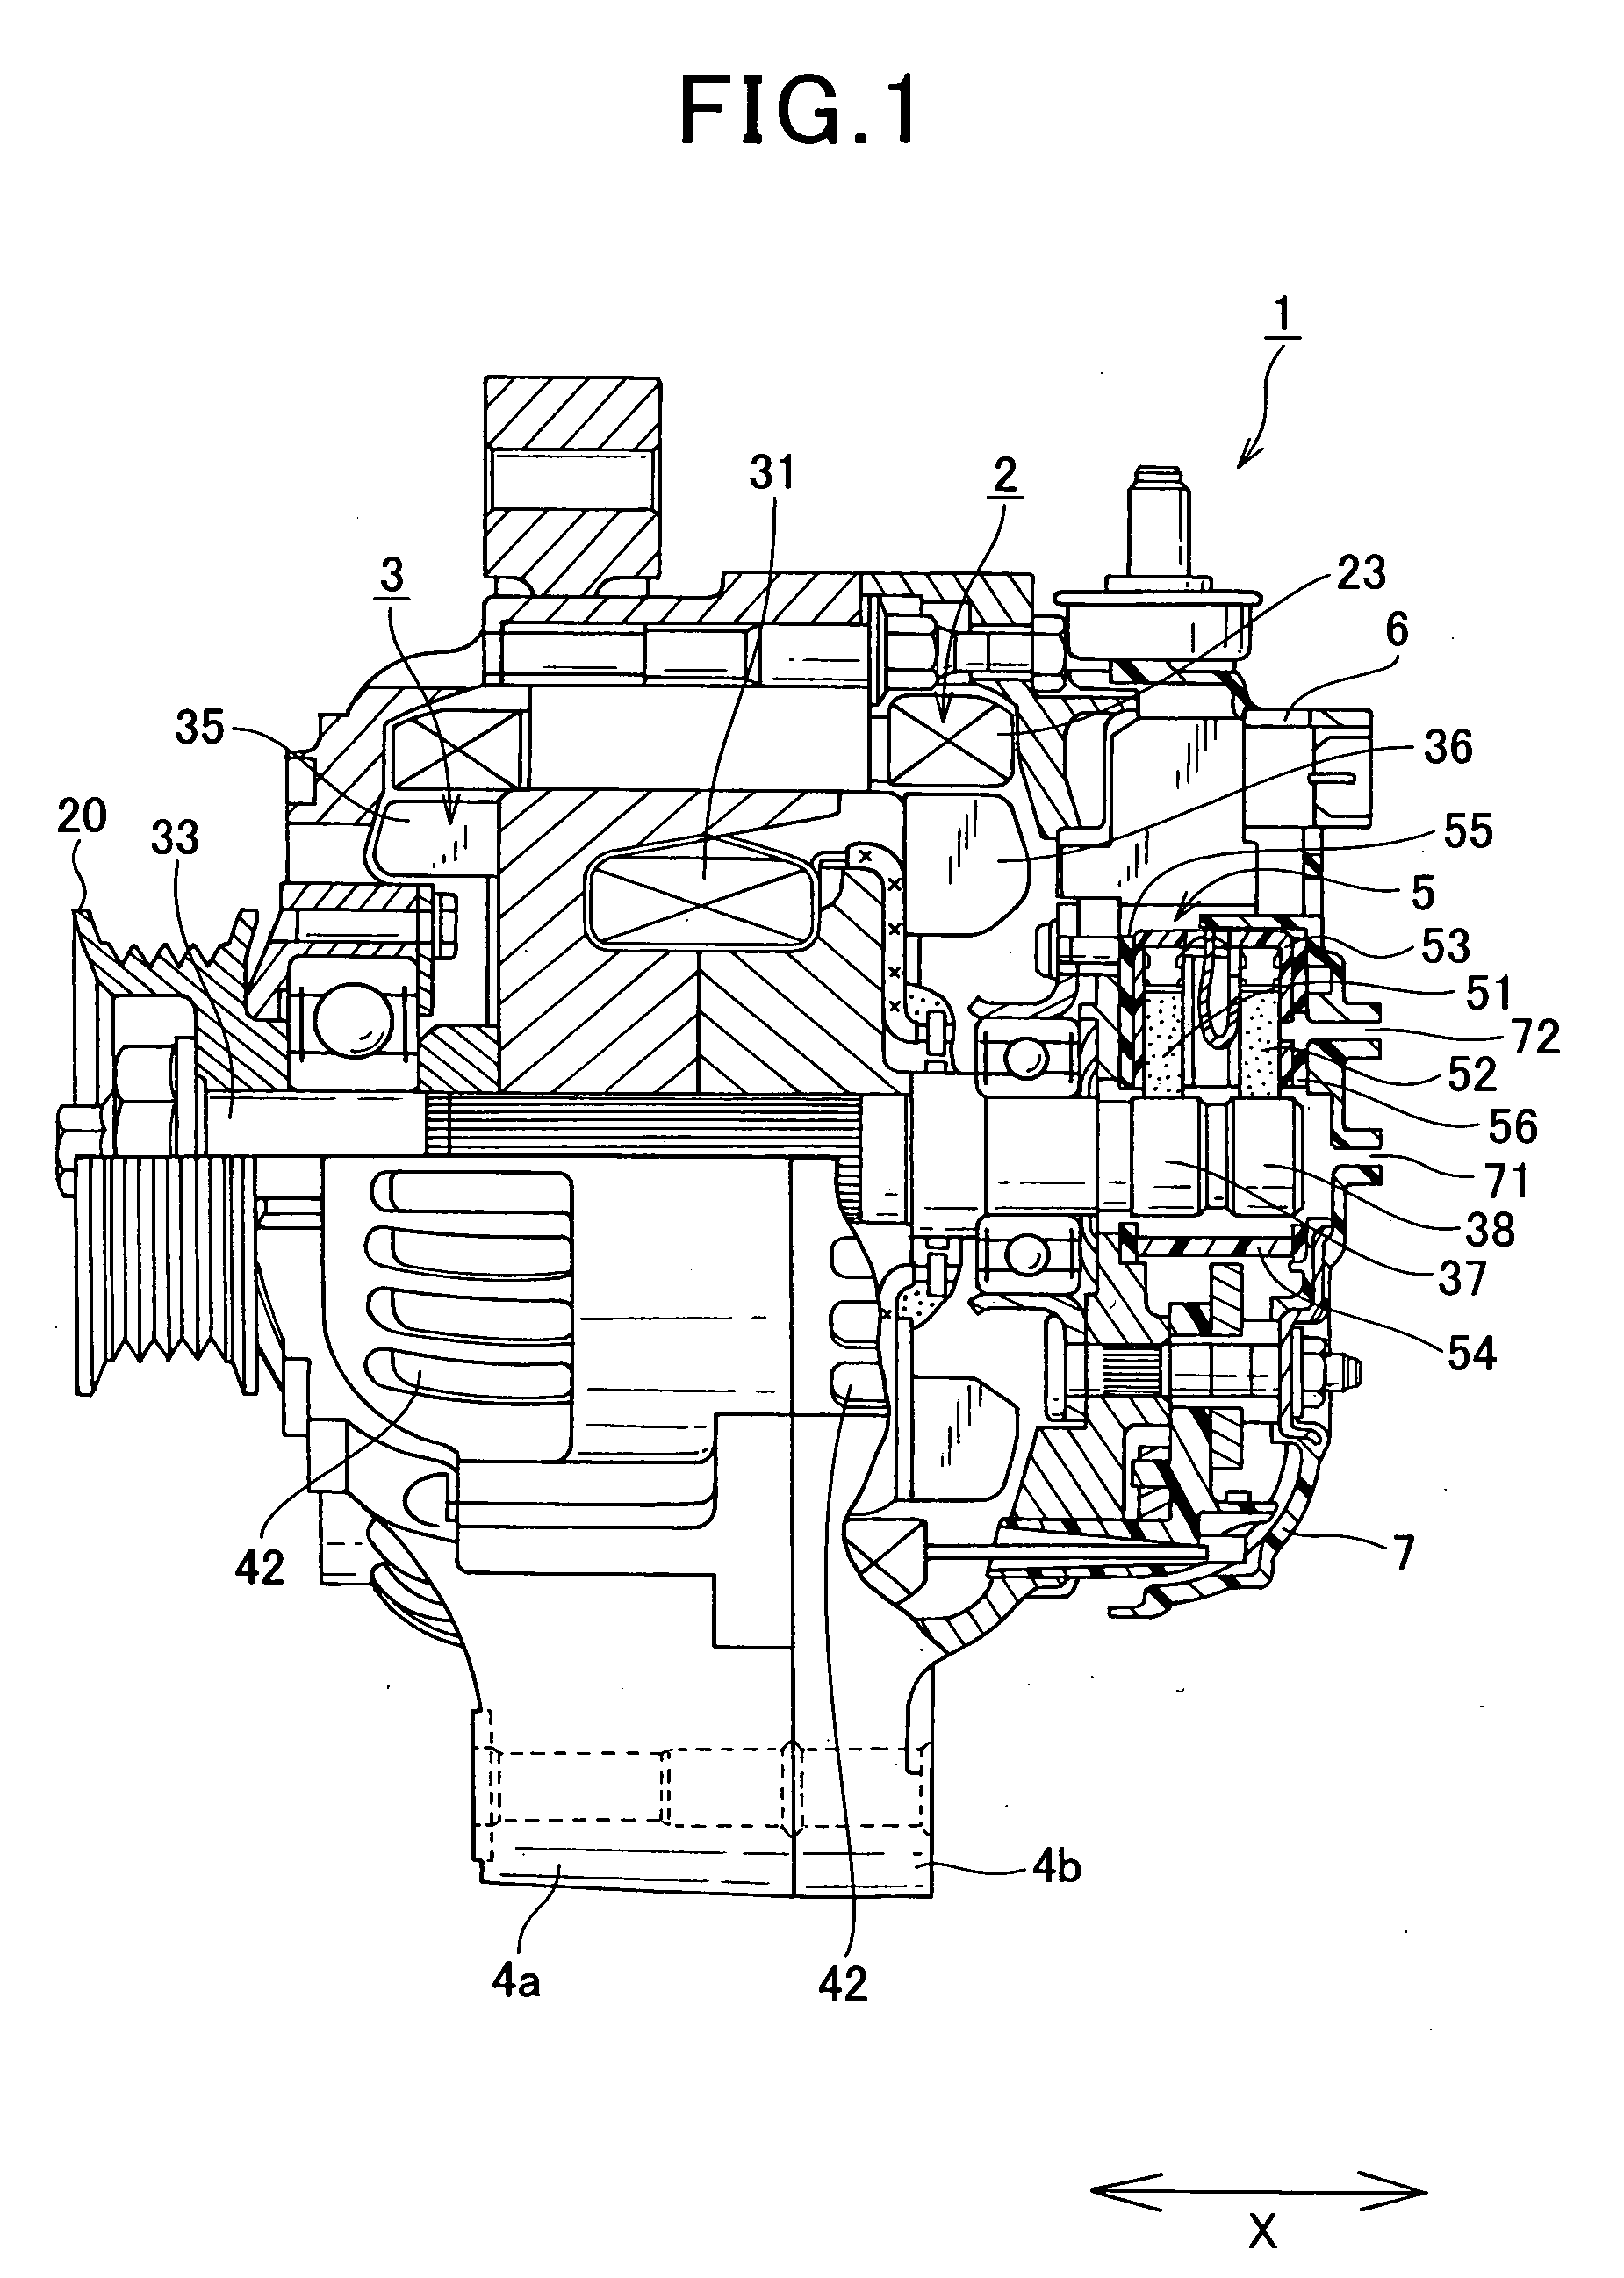 Vehicle alternator provided with brushes and slip rings